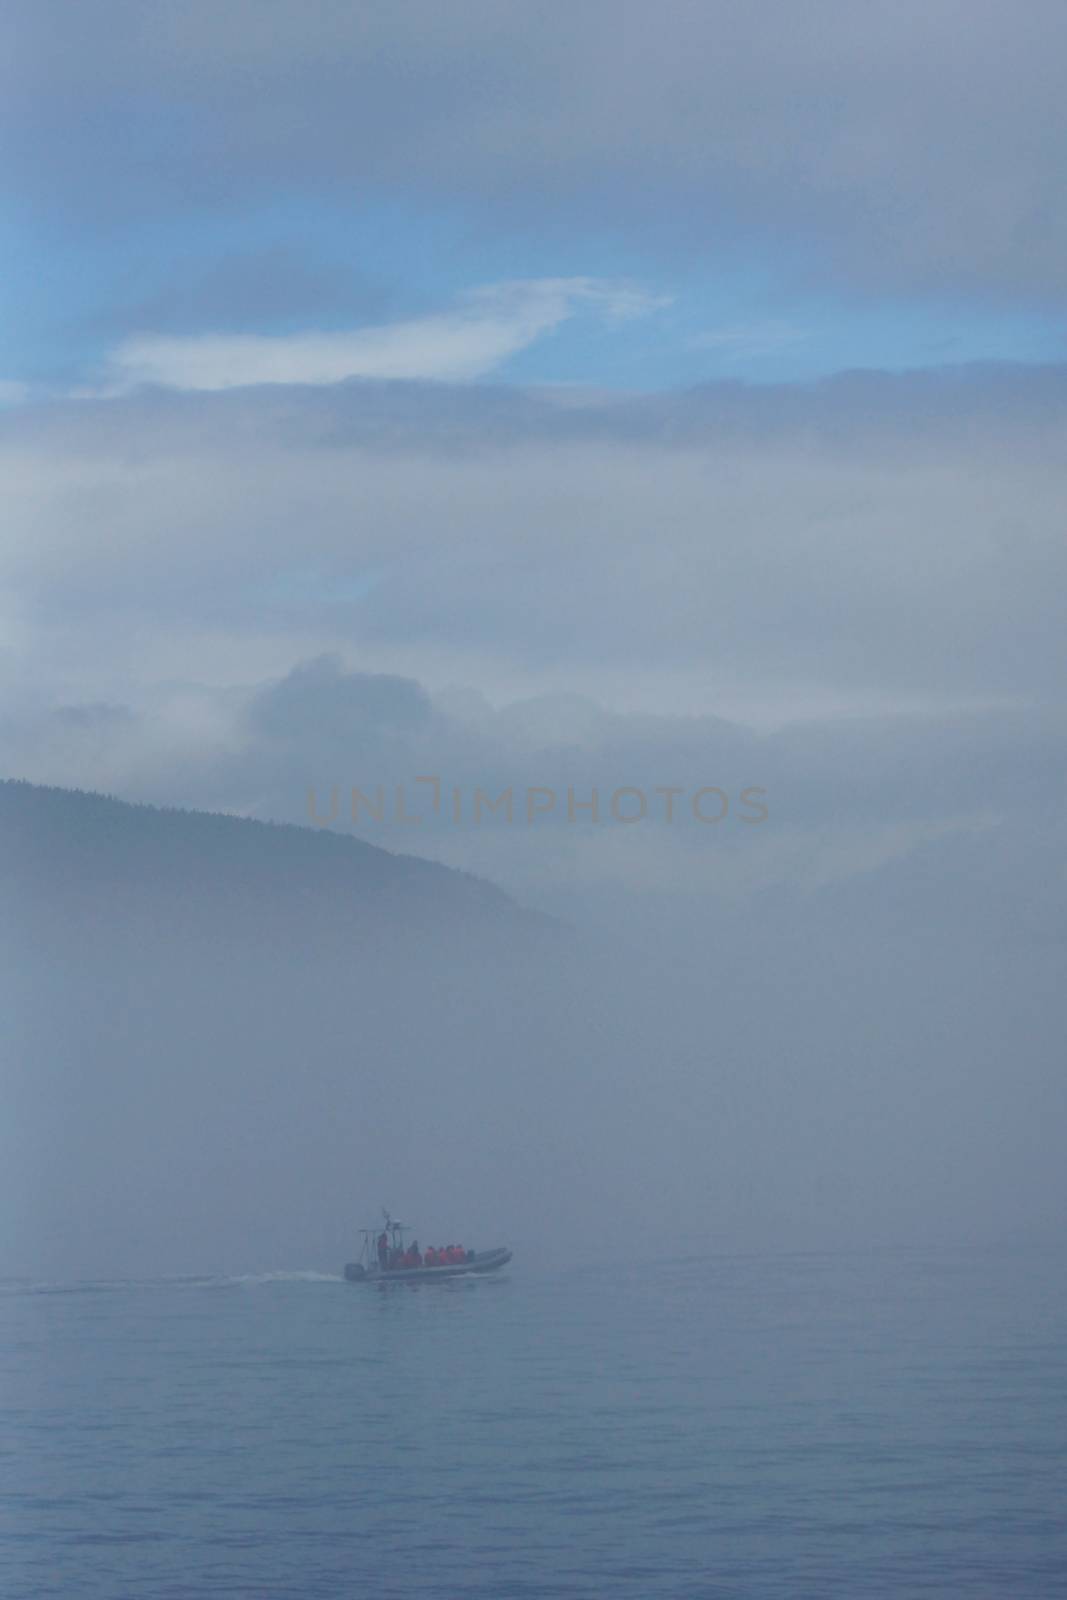 Boat on water in the fog by Mirage3